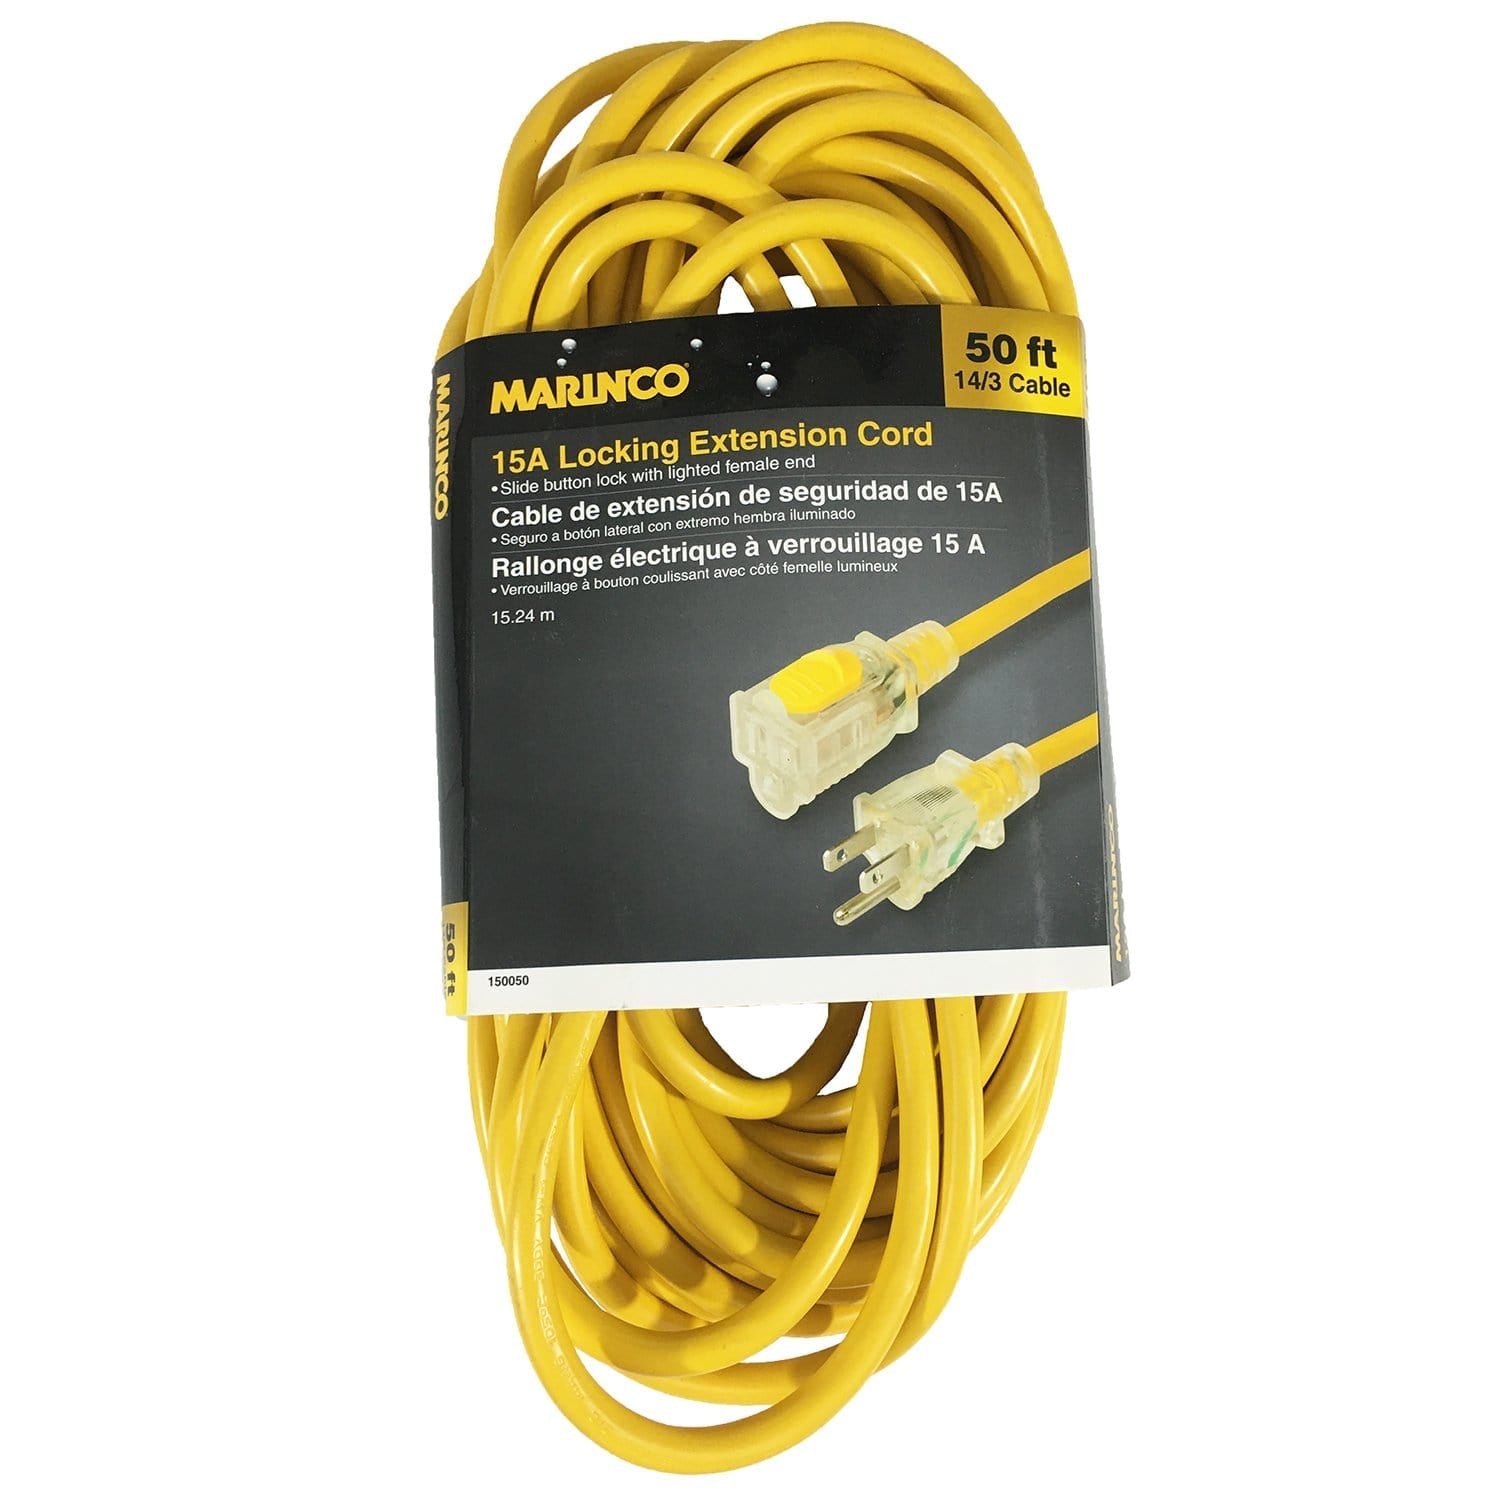 Marinco 50ft 14/3 15A Locking Extension Cord - Cordsets & Adapters